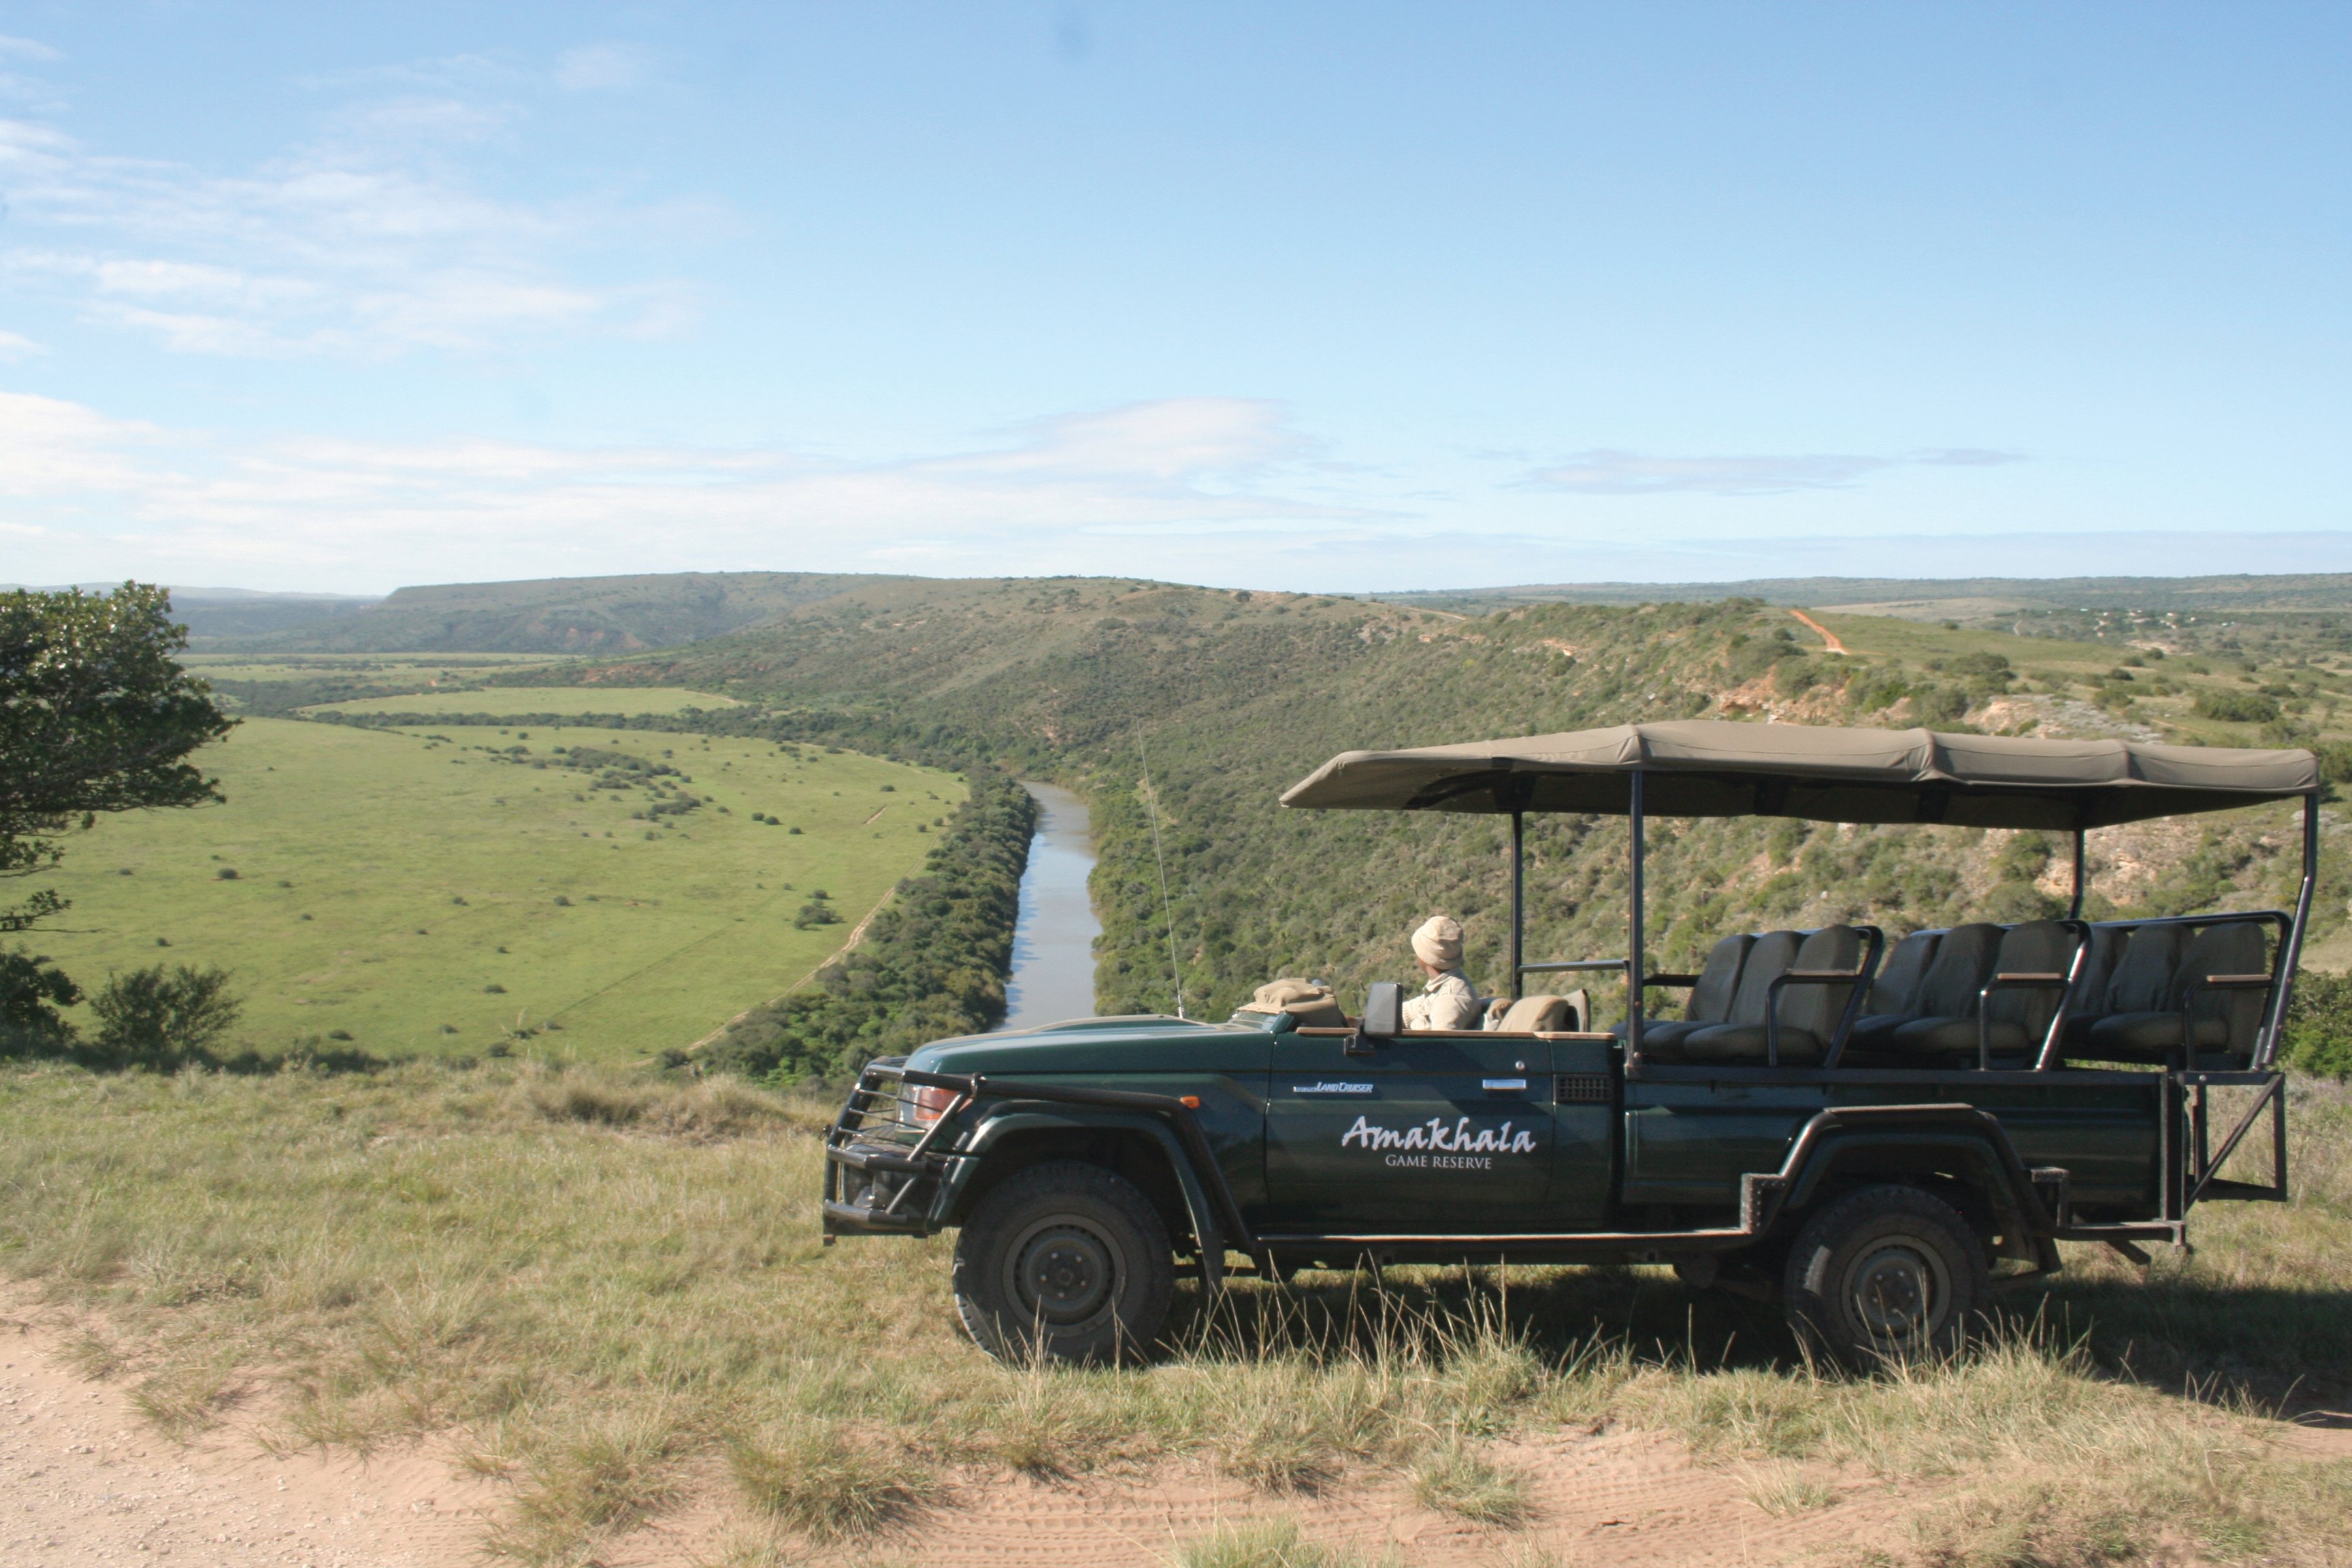 Spend a couple of days looking for wildlife at Amakhala Game Reserve